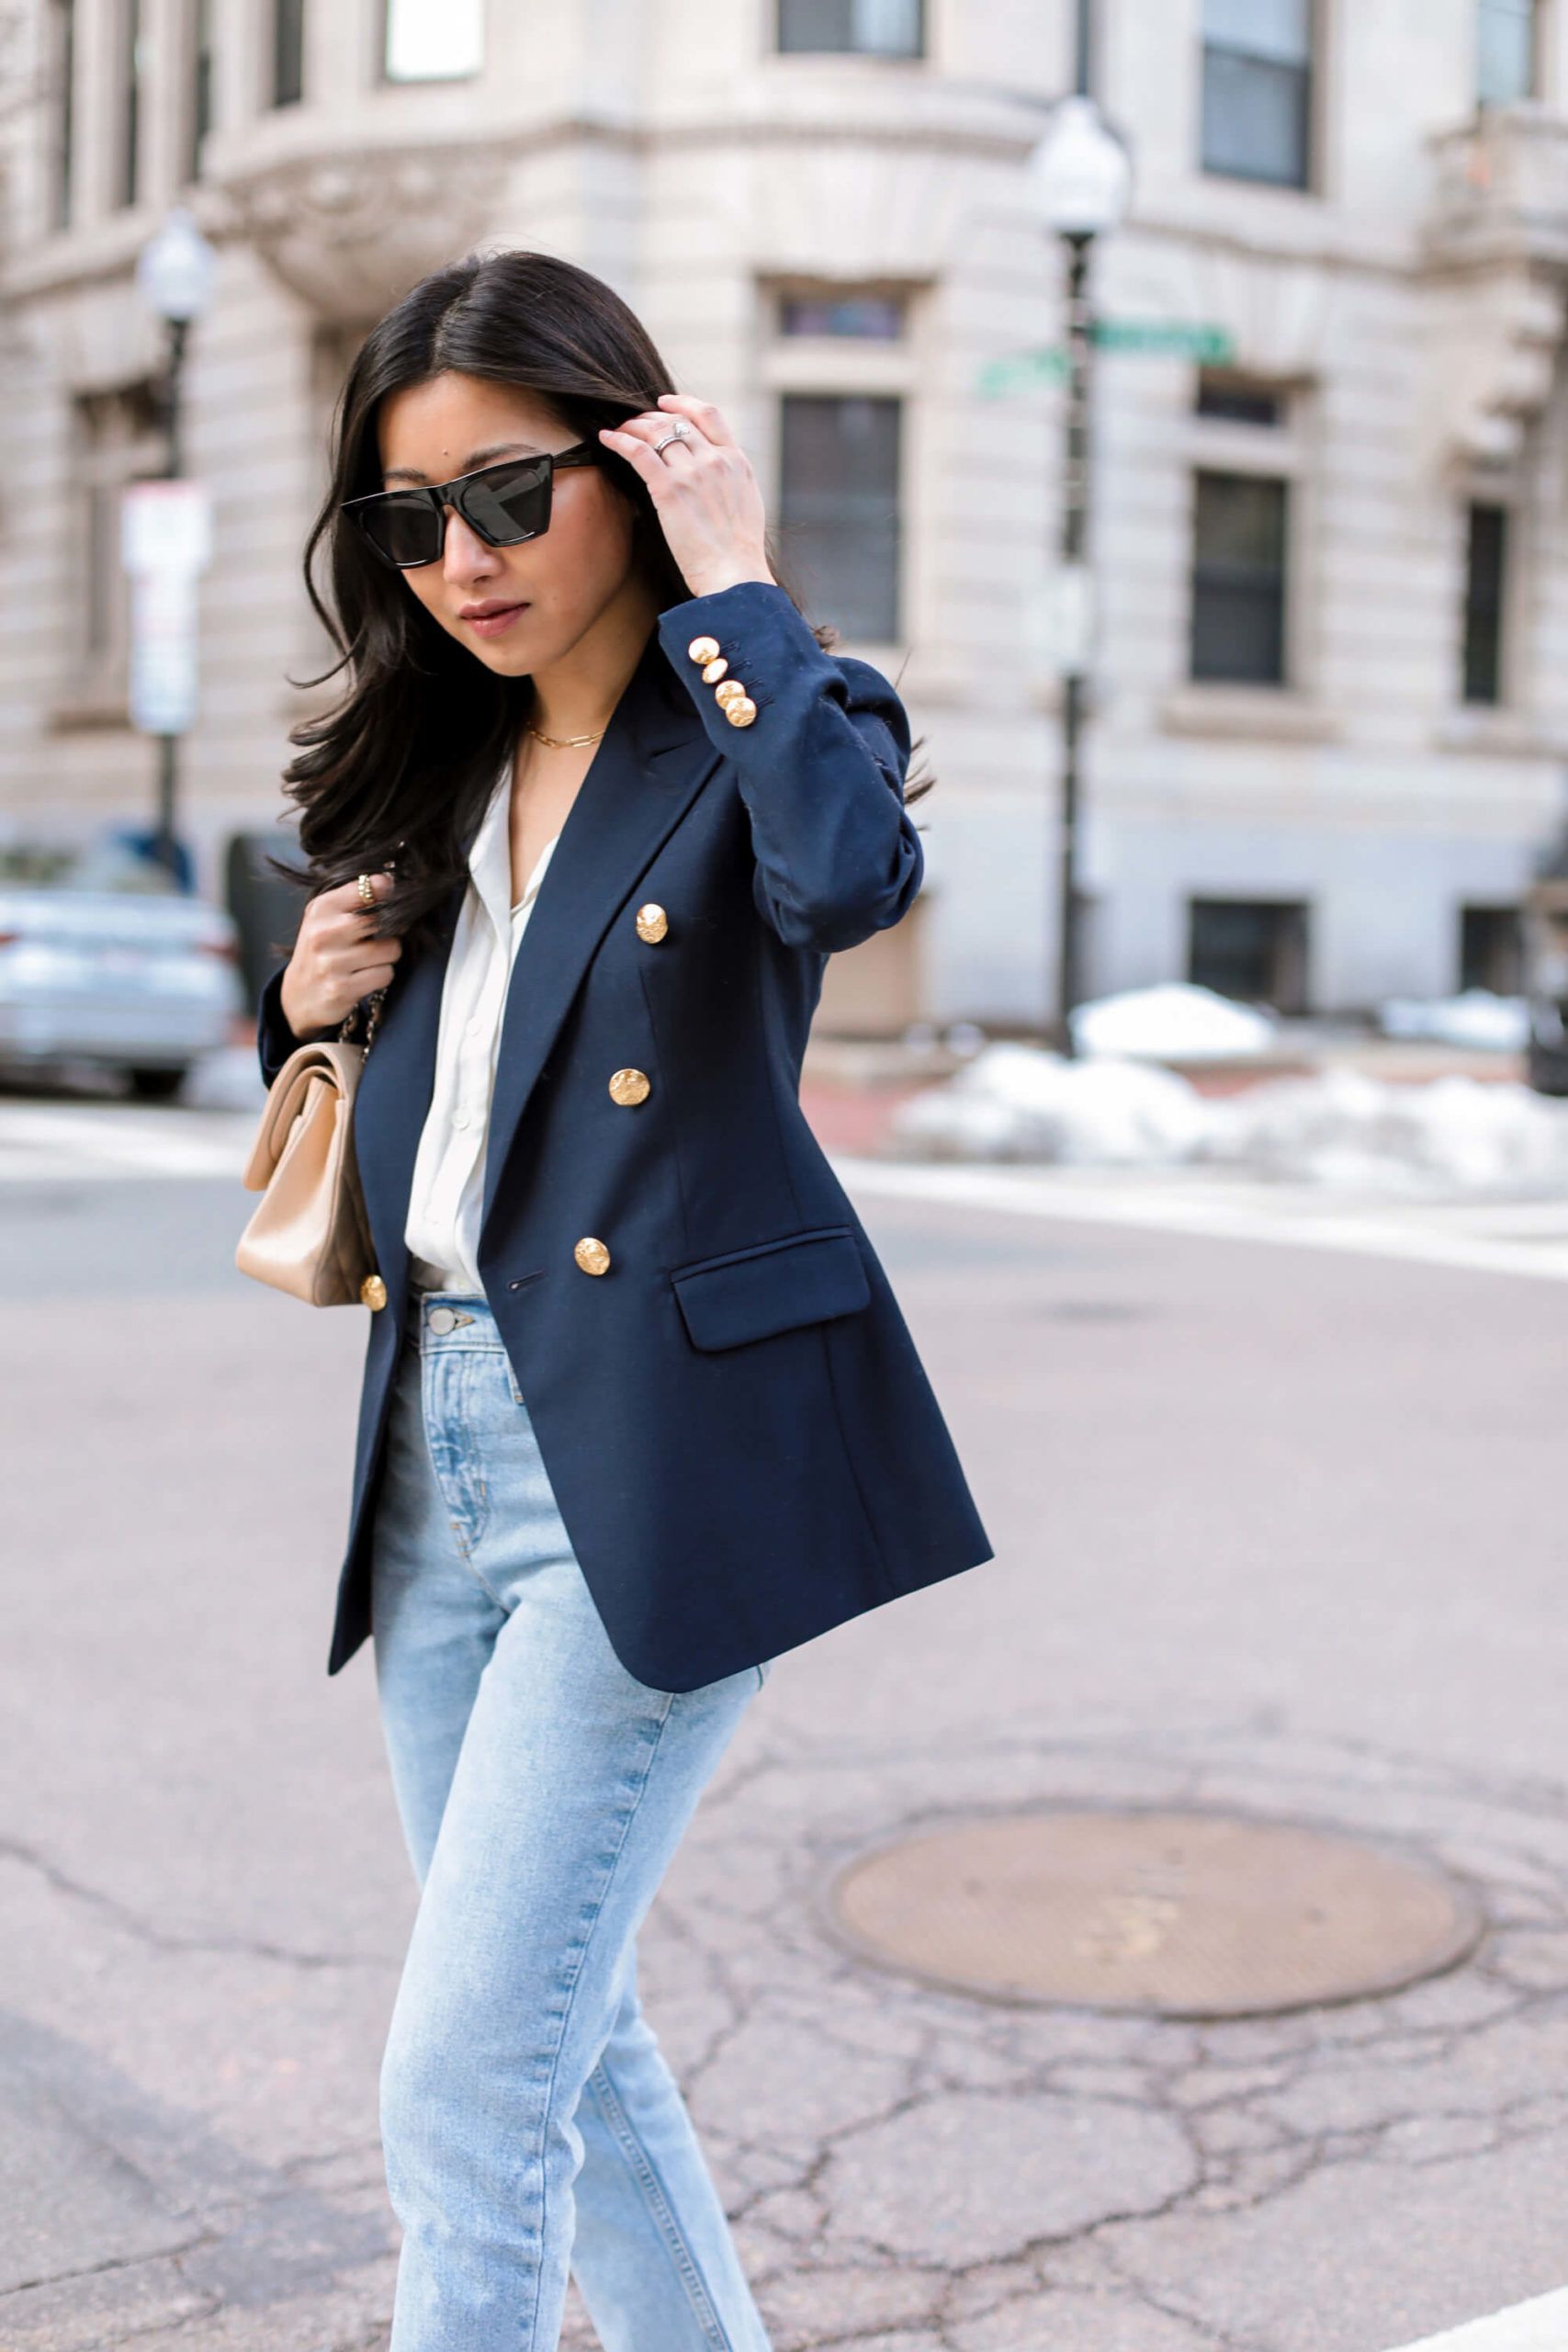 How to Wear Blue Blazer: Best 13 Sharp & Smart Looking Outfits for Women